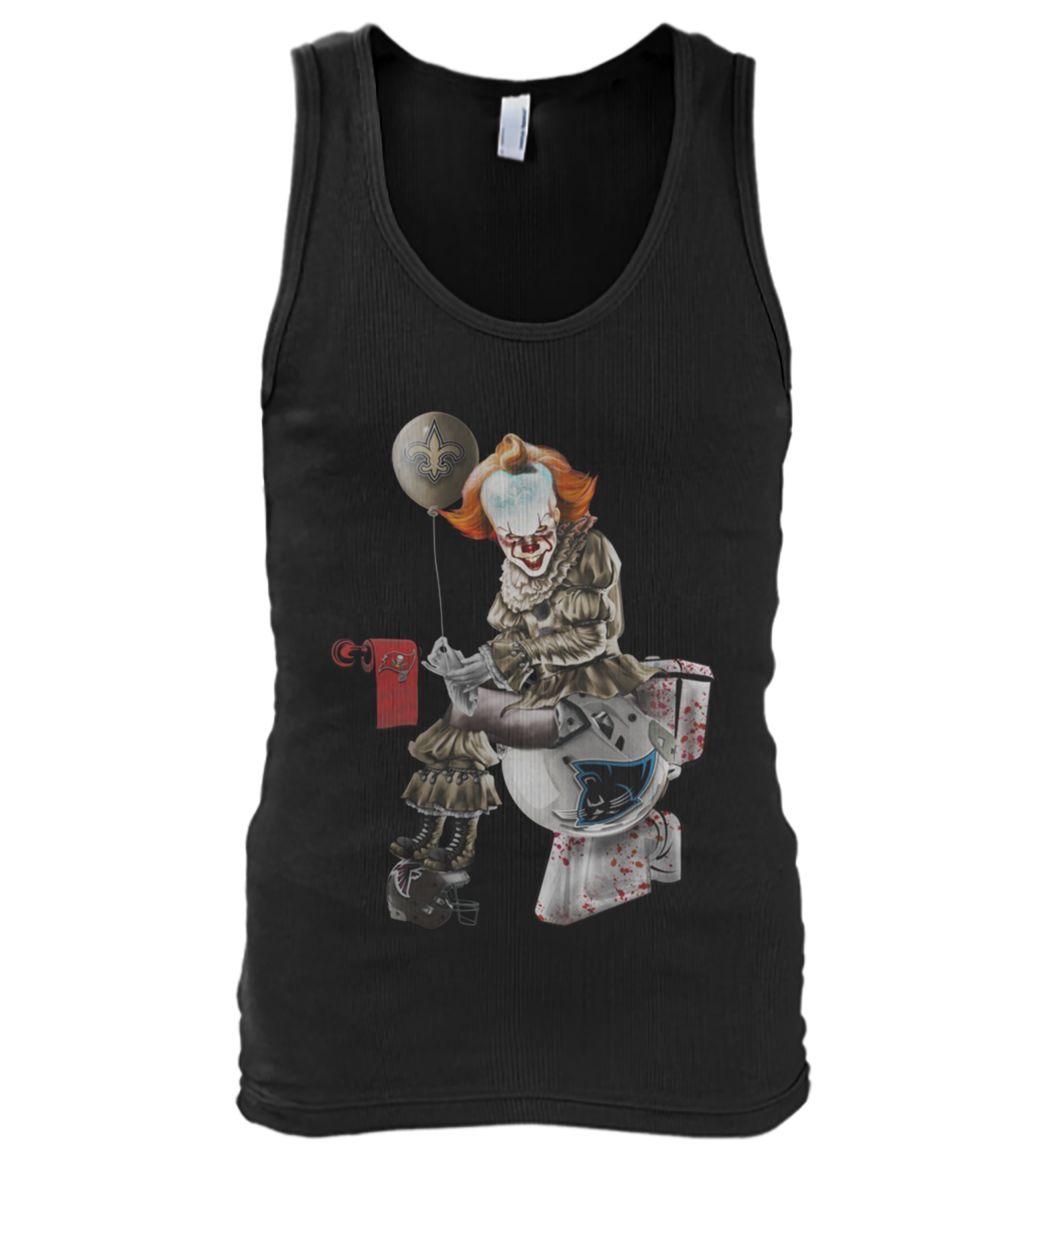 It pennywise new orleans saints sitting on carolina panthers tank top